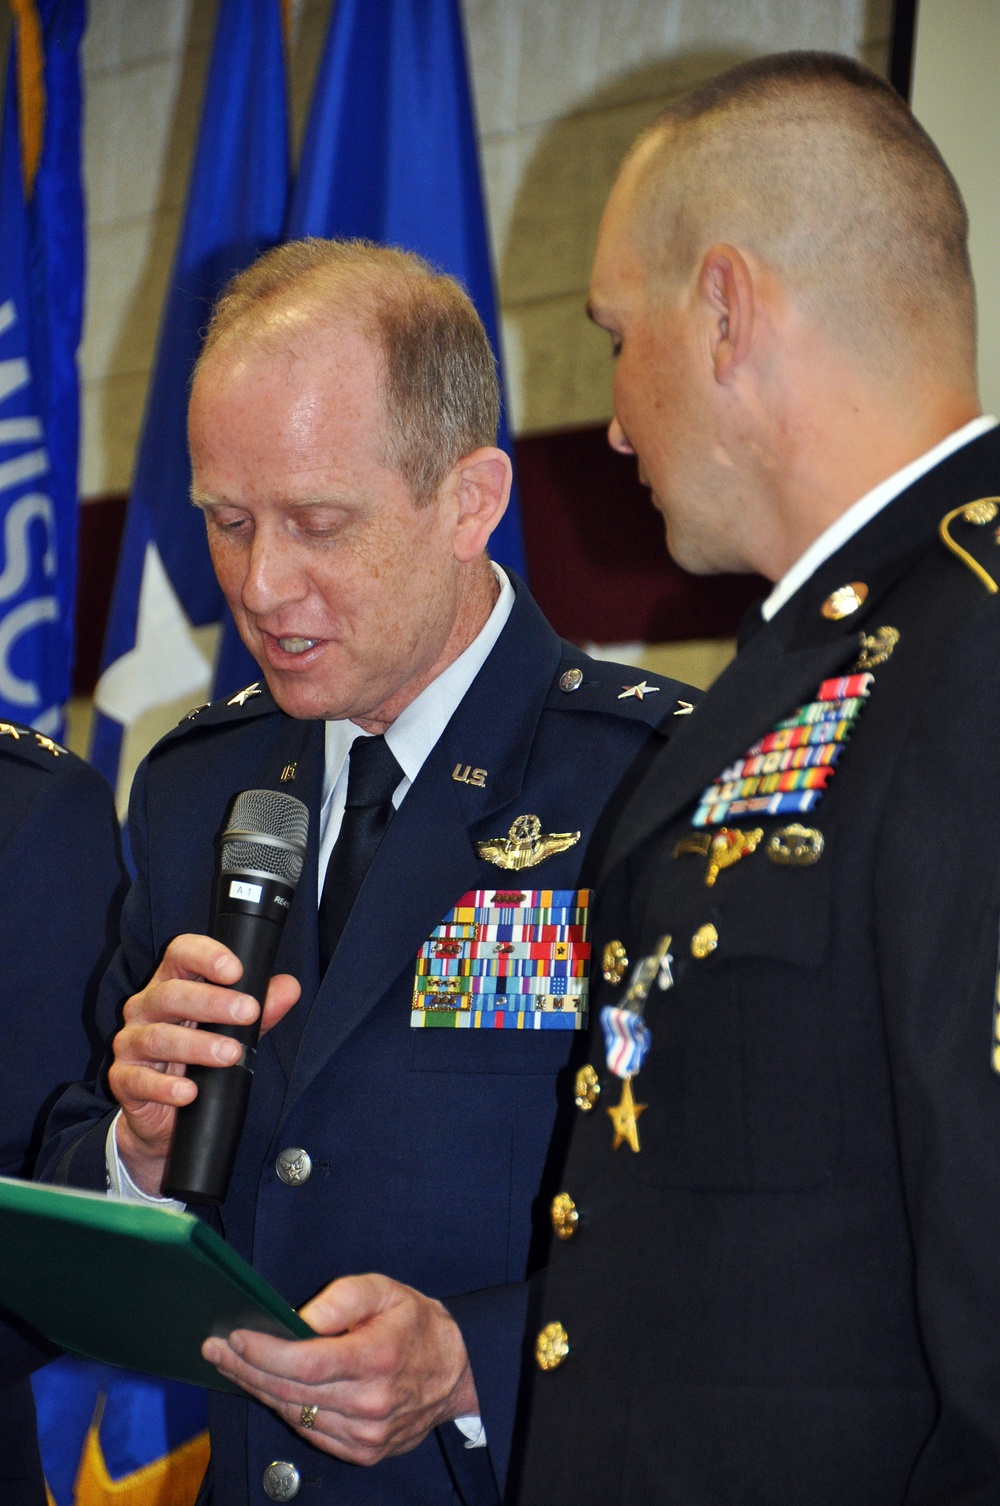 Wisconsin National Guard soldier awarded Silver Star